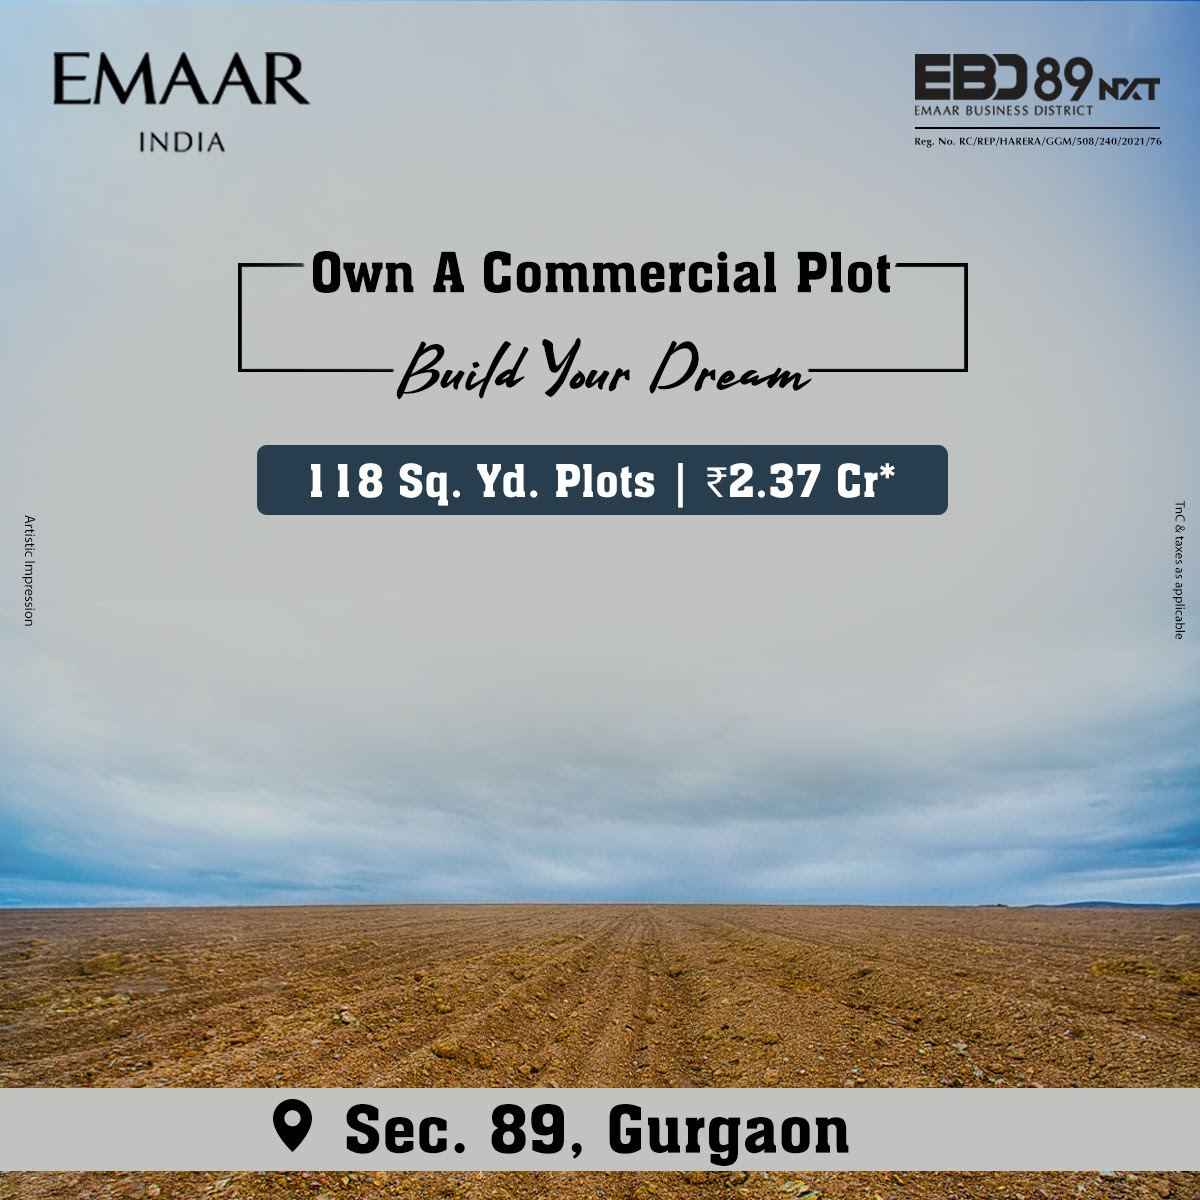 Own a commercial plot 118 Sqyd Rs 2.37 Cr onwards at EBD 89 Nxt, Gurgaon Update